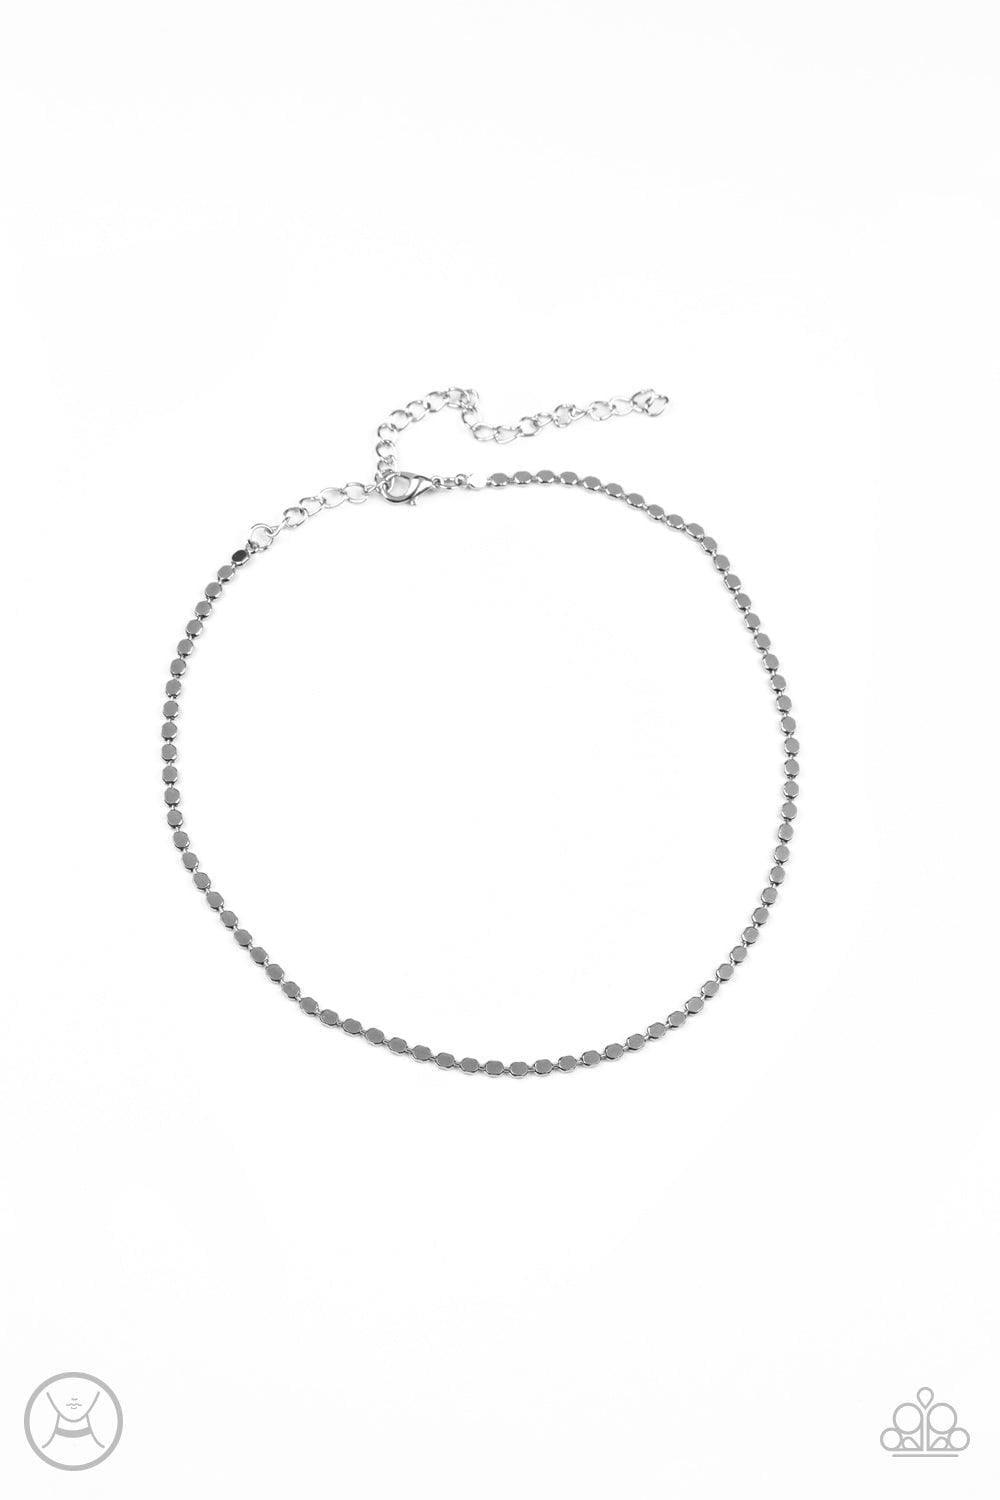 Paparazzi Accessories - When In Chrome - Silver Choker Necklace - Bling by JessieK